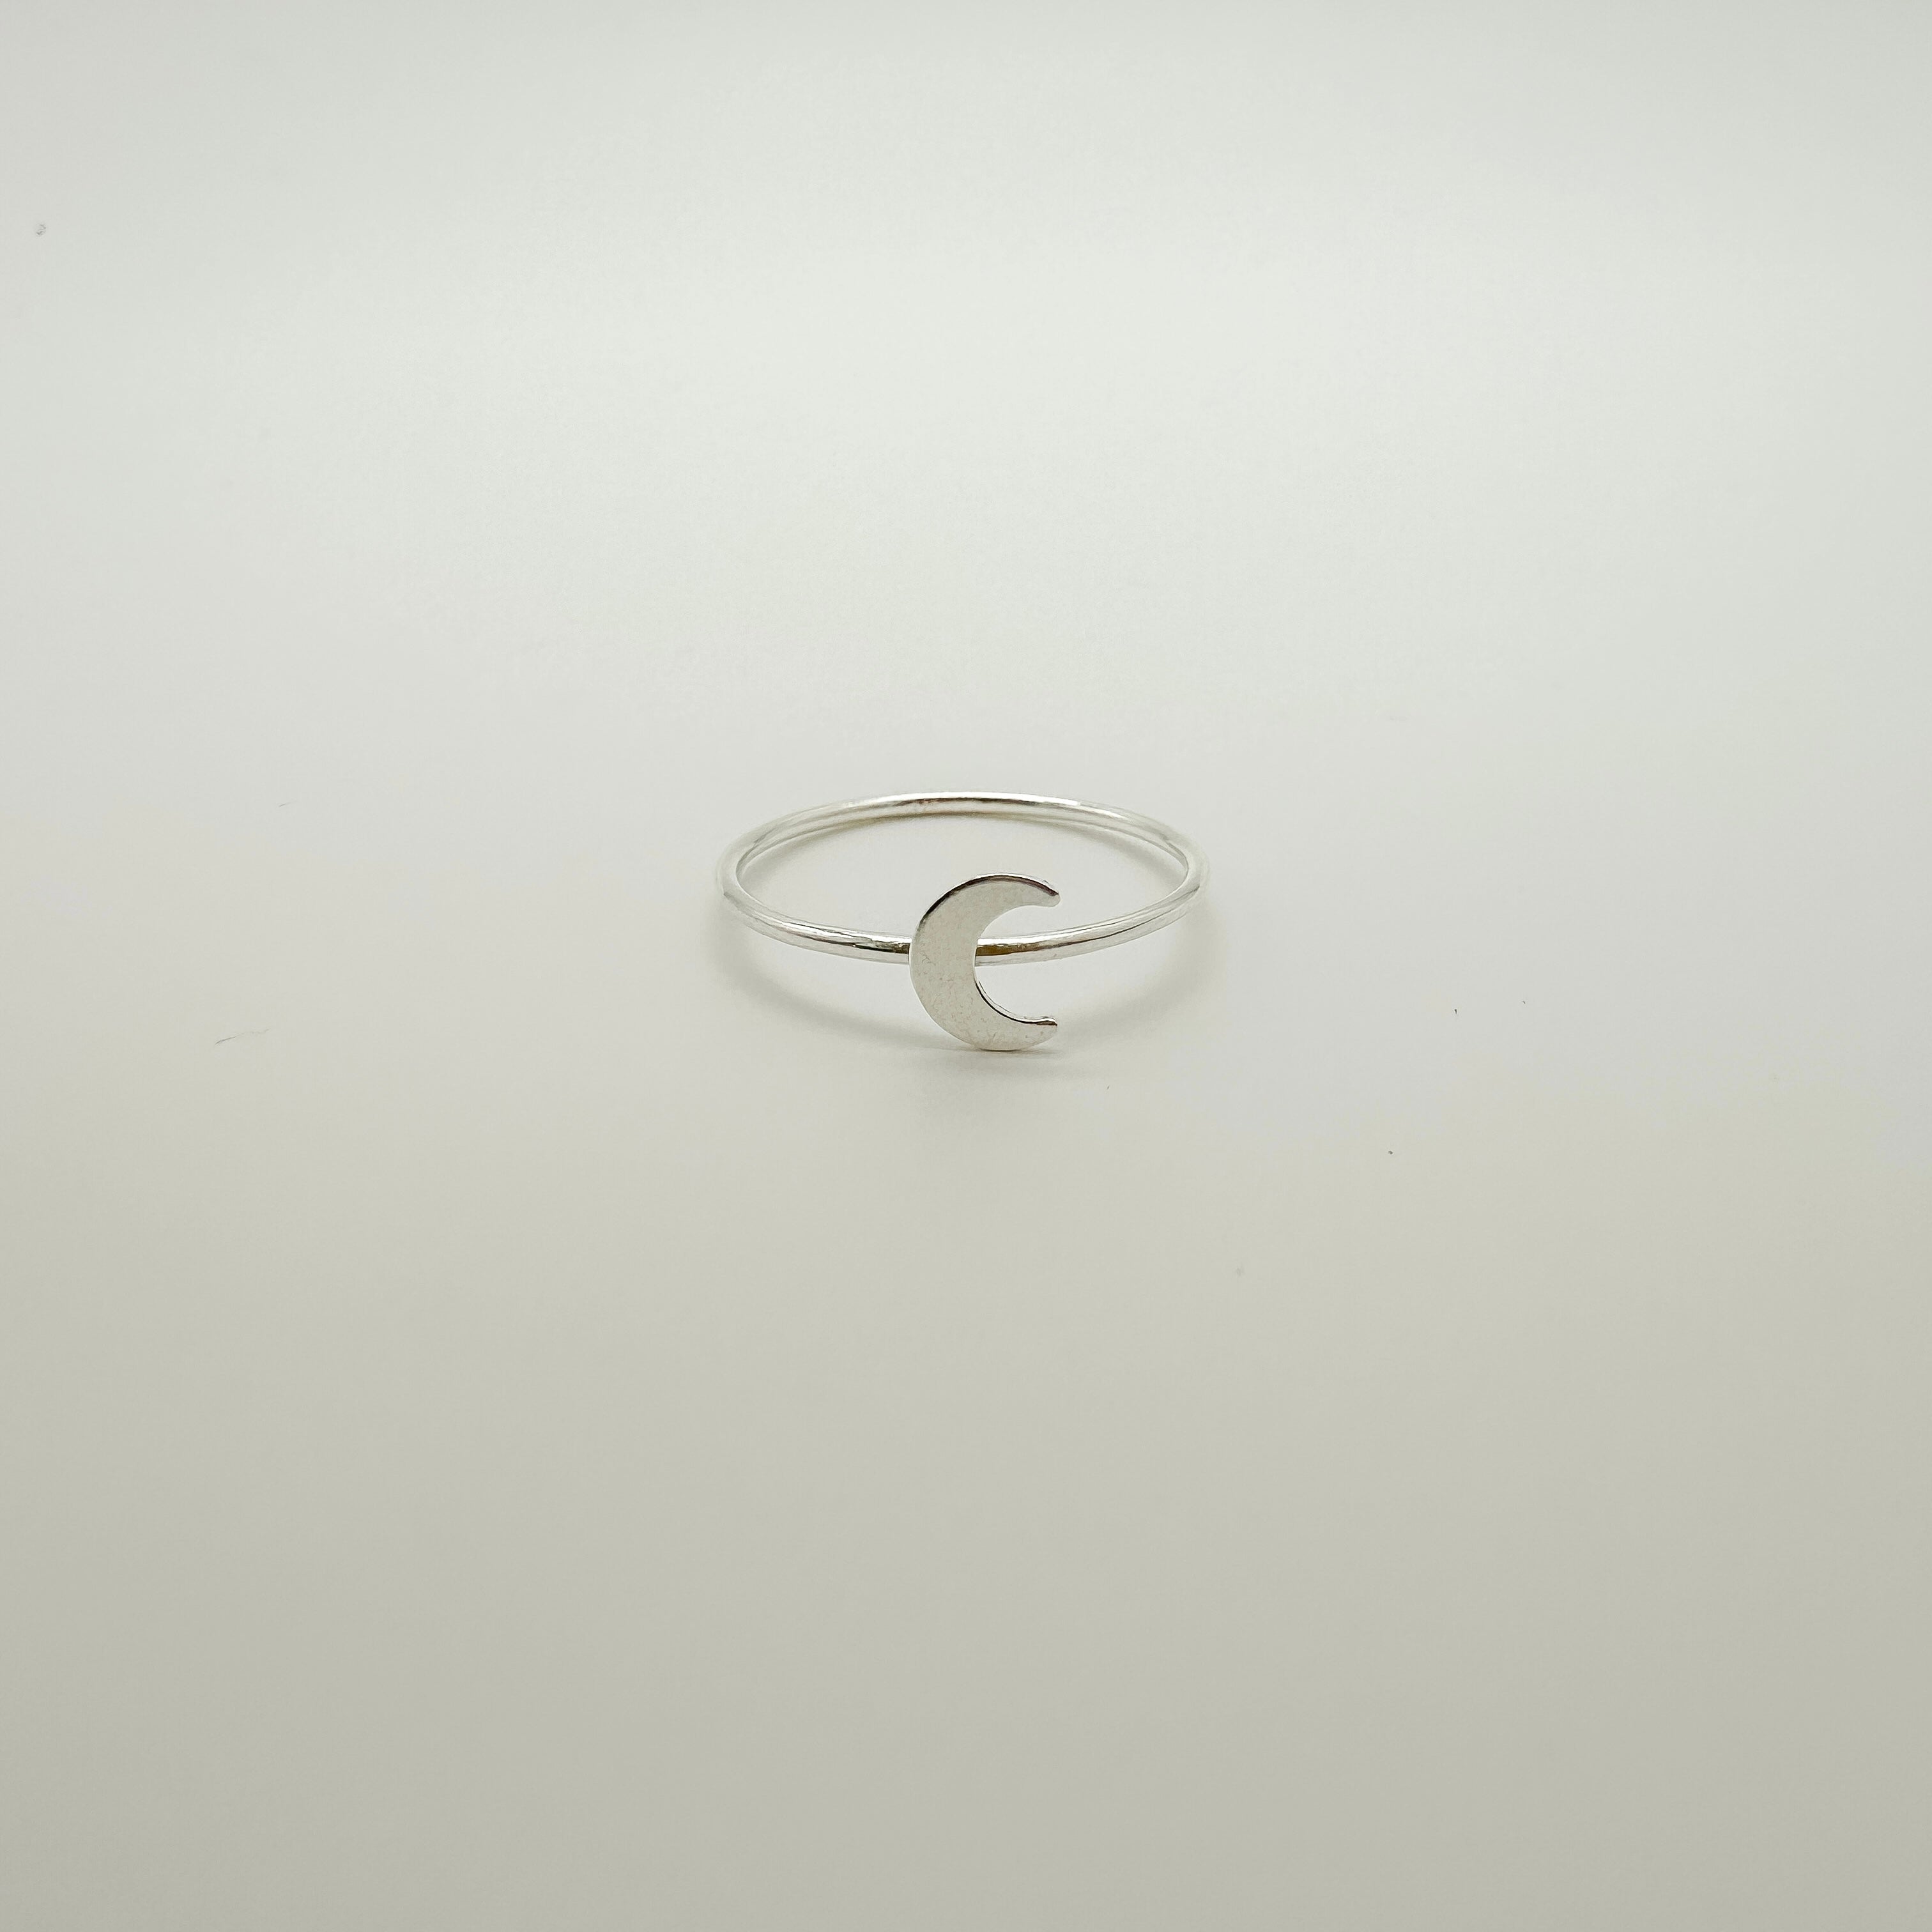 gold filled crescent moon ring, crescent moon ring, moon ring, moon jewelry, sterling silver moon ring, sterling silver stacking rings, wholesale sterling silver rings